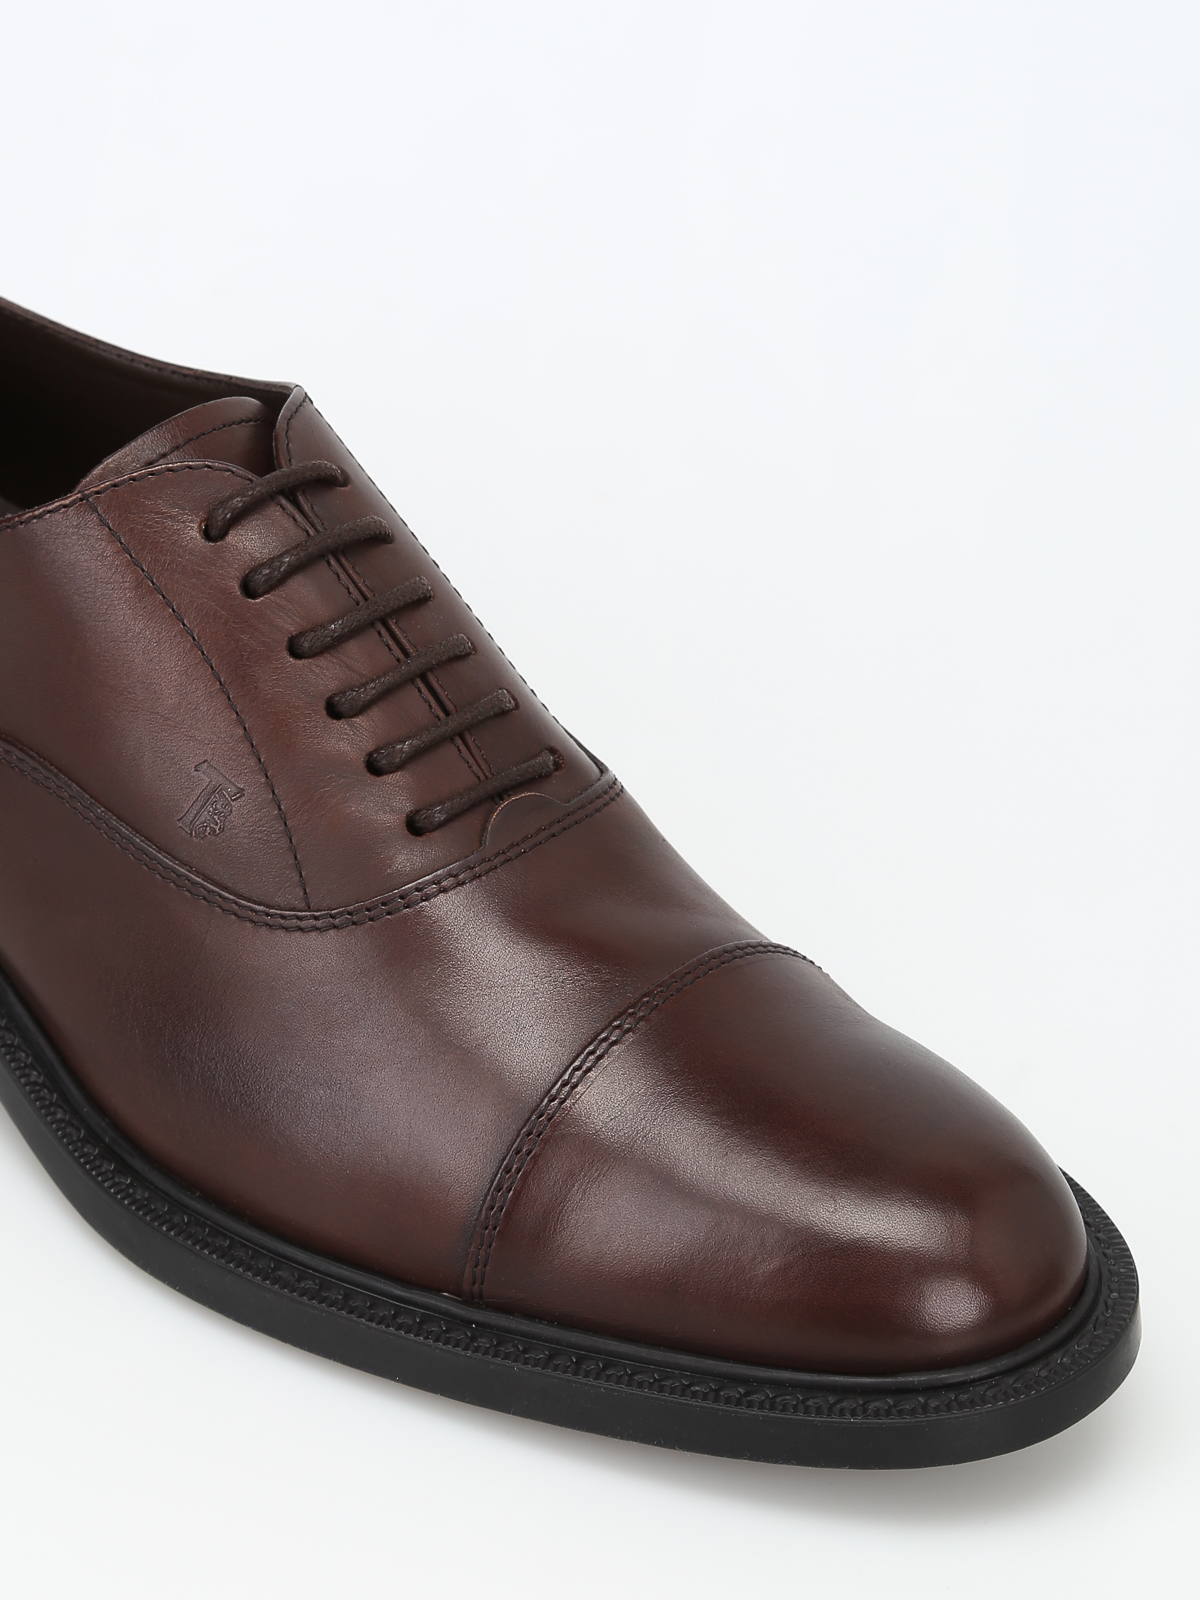 Ebony leather classic Oxford shoes 